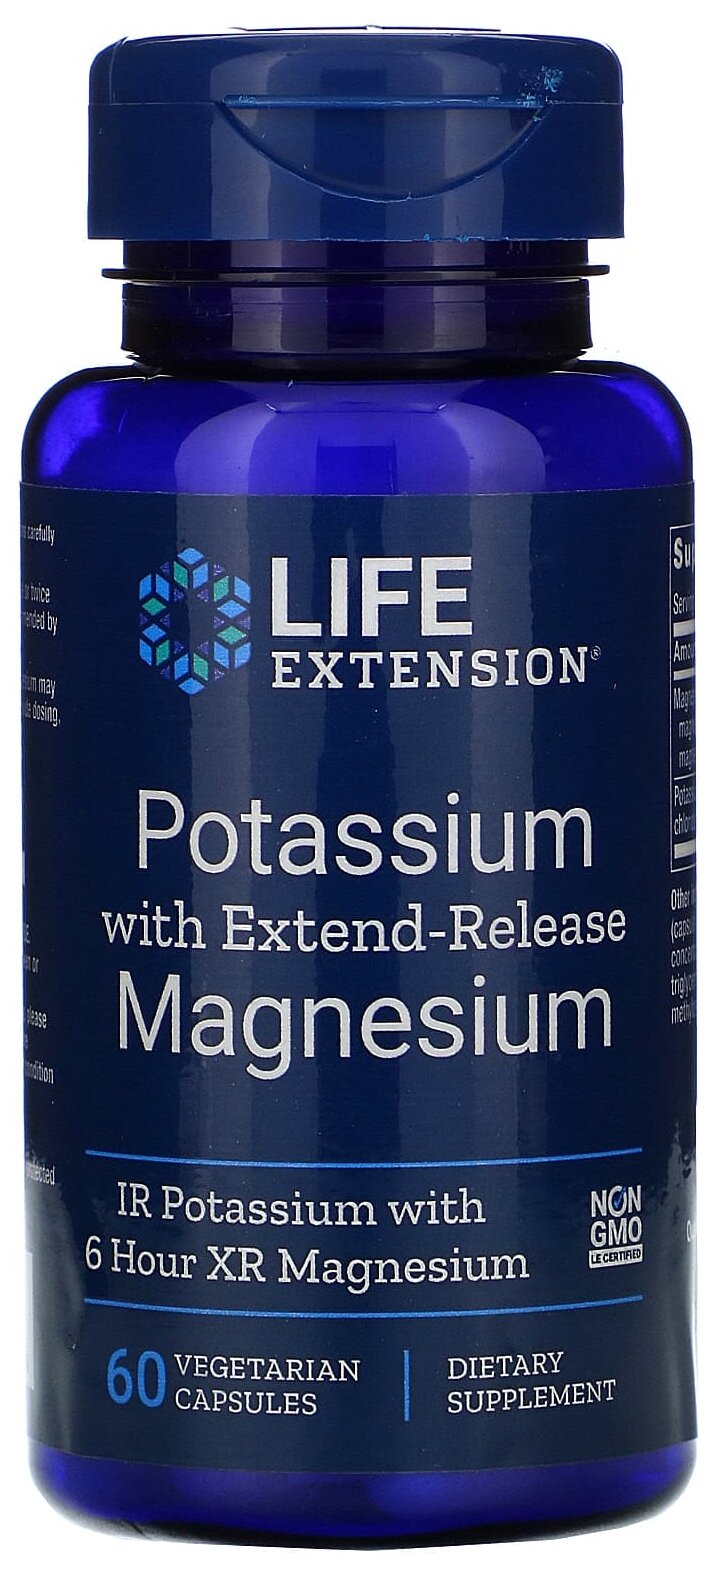 Капсулы Life Extension Potassium with Extend-Release Magnesium, 100 г, 60 шт.